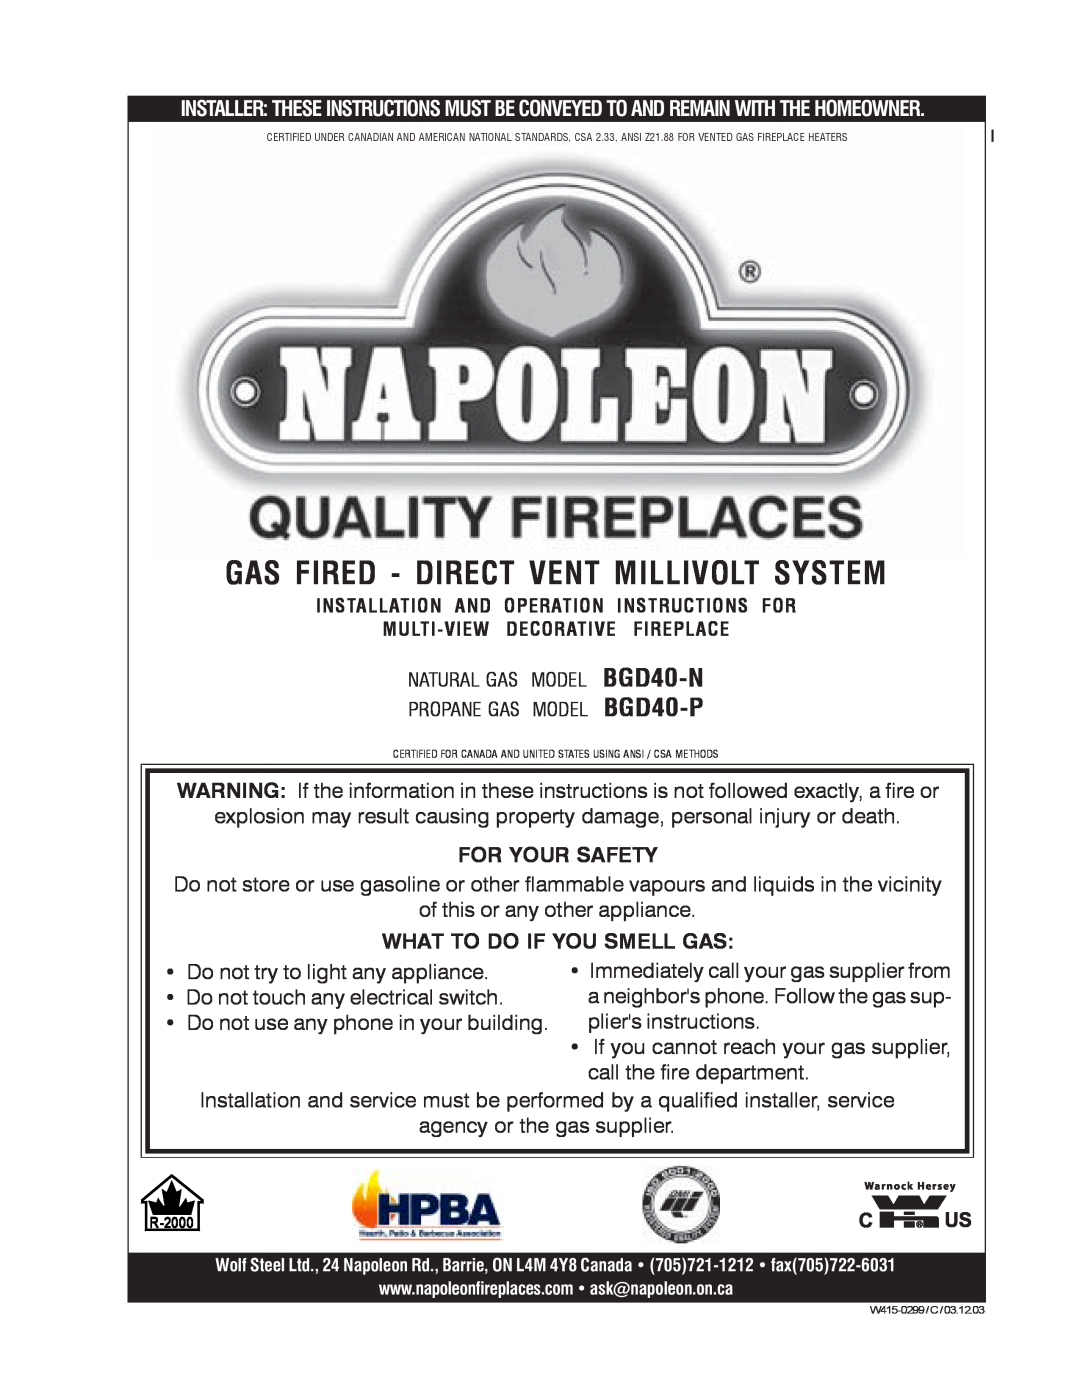 Napoleon Fireplaces manual BGD40-N BGD40-P, For Your Safety, What To Do If You Smell Gas 